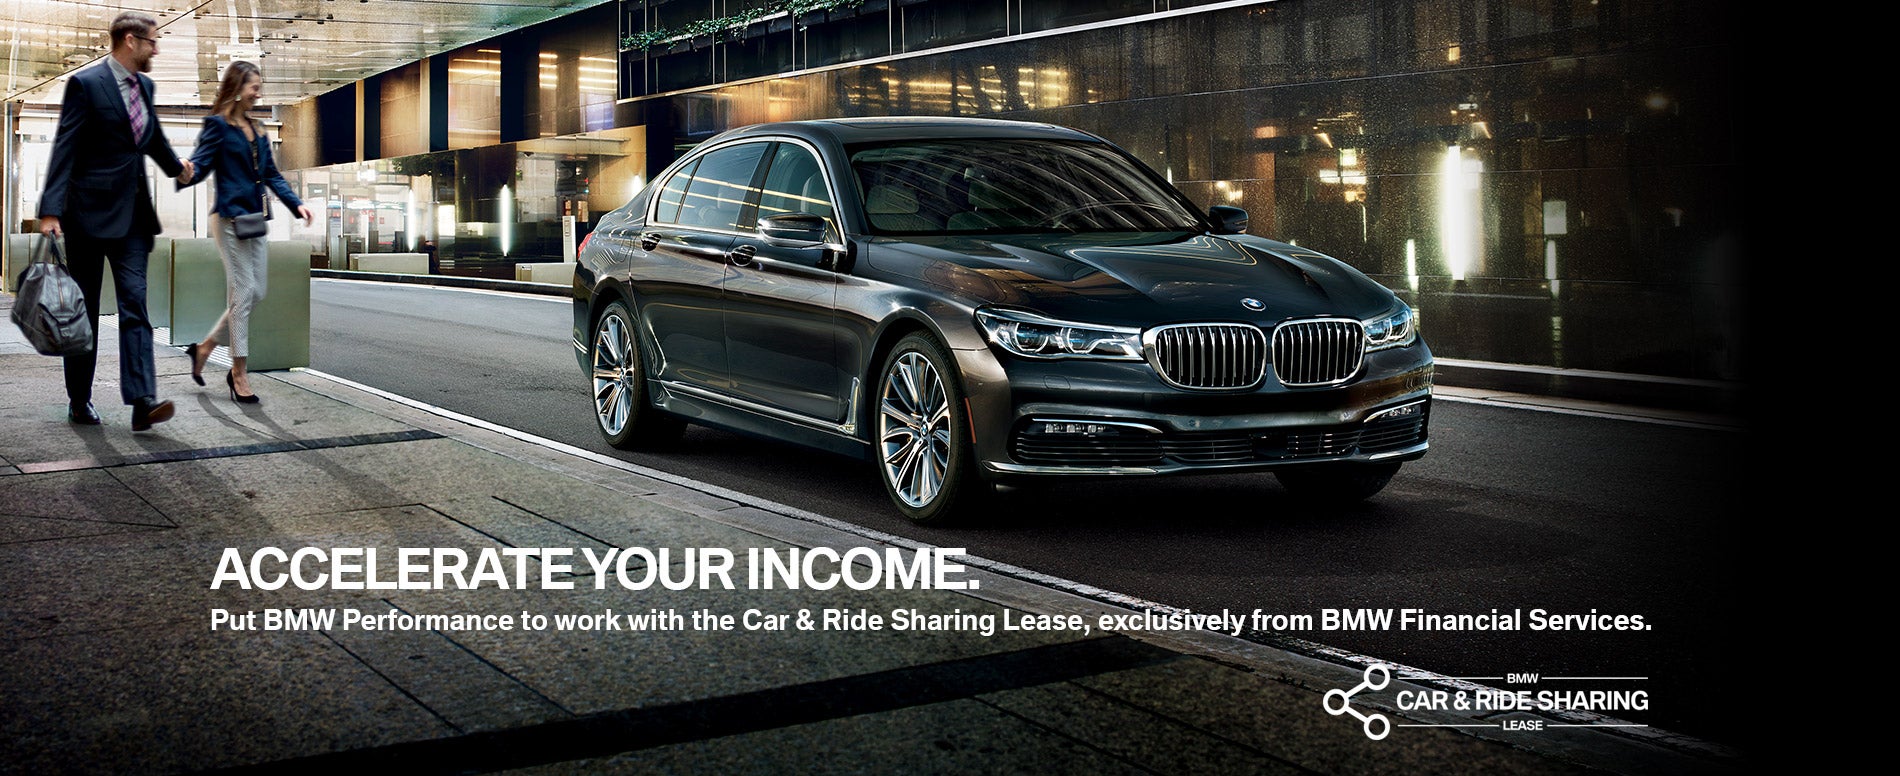 The BMW Car & Ride Sharing Lease at BMW of Grand Blanc in Grand Blanc MI